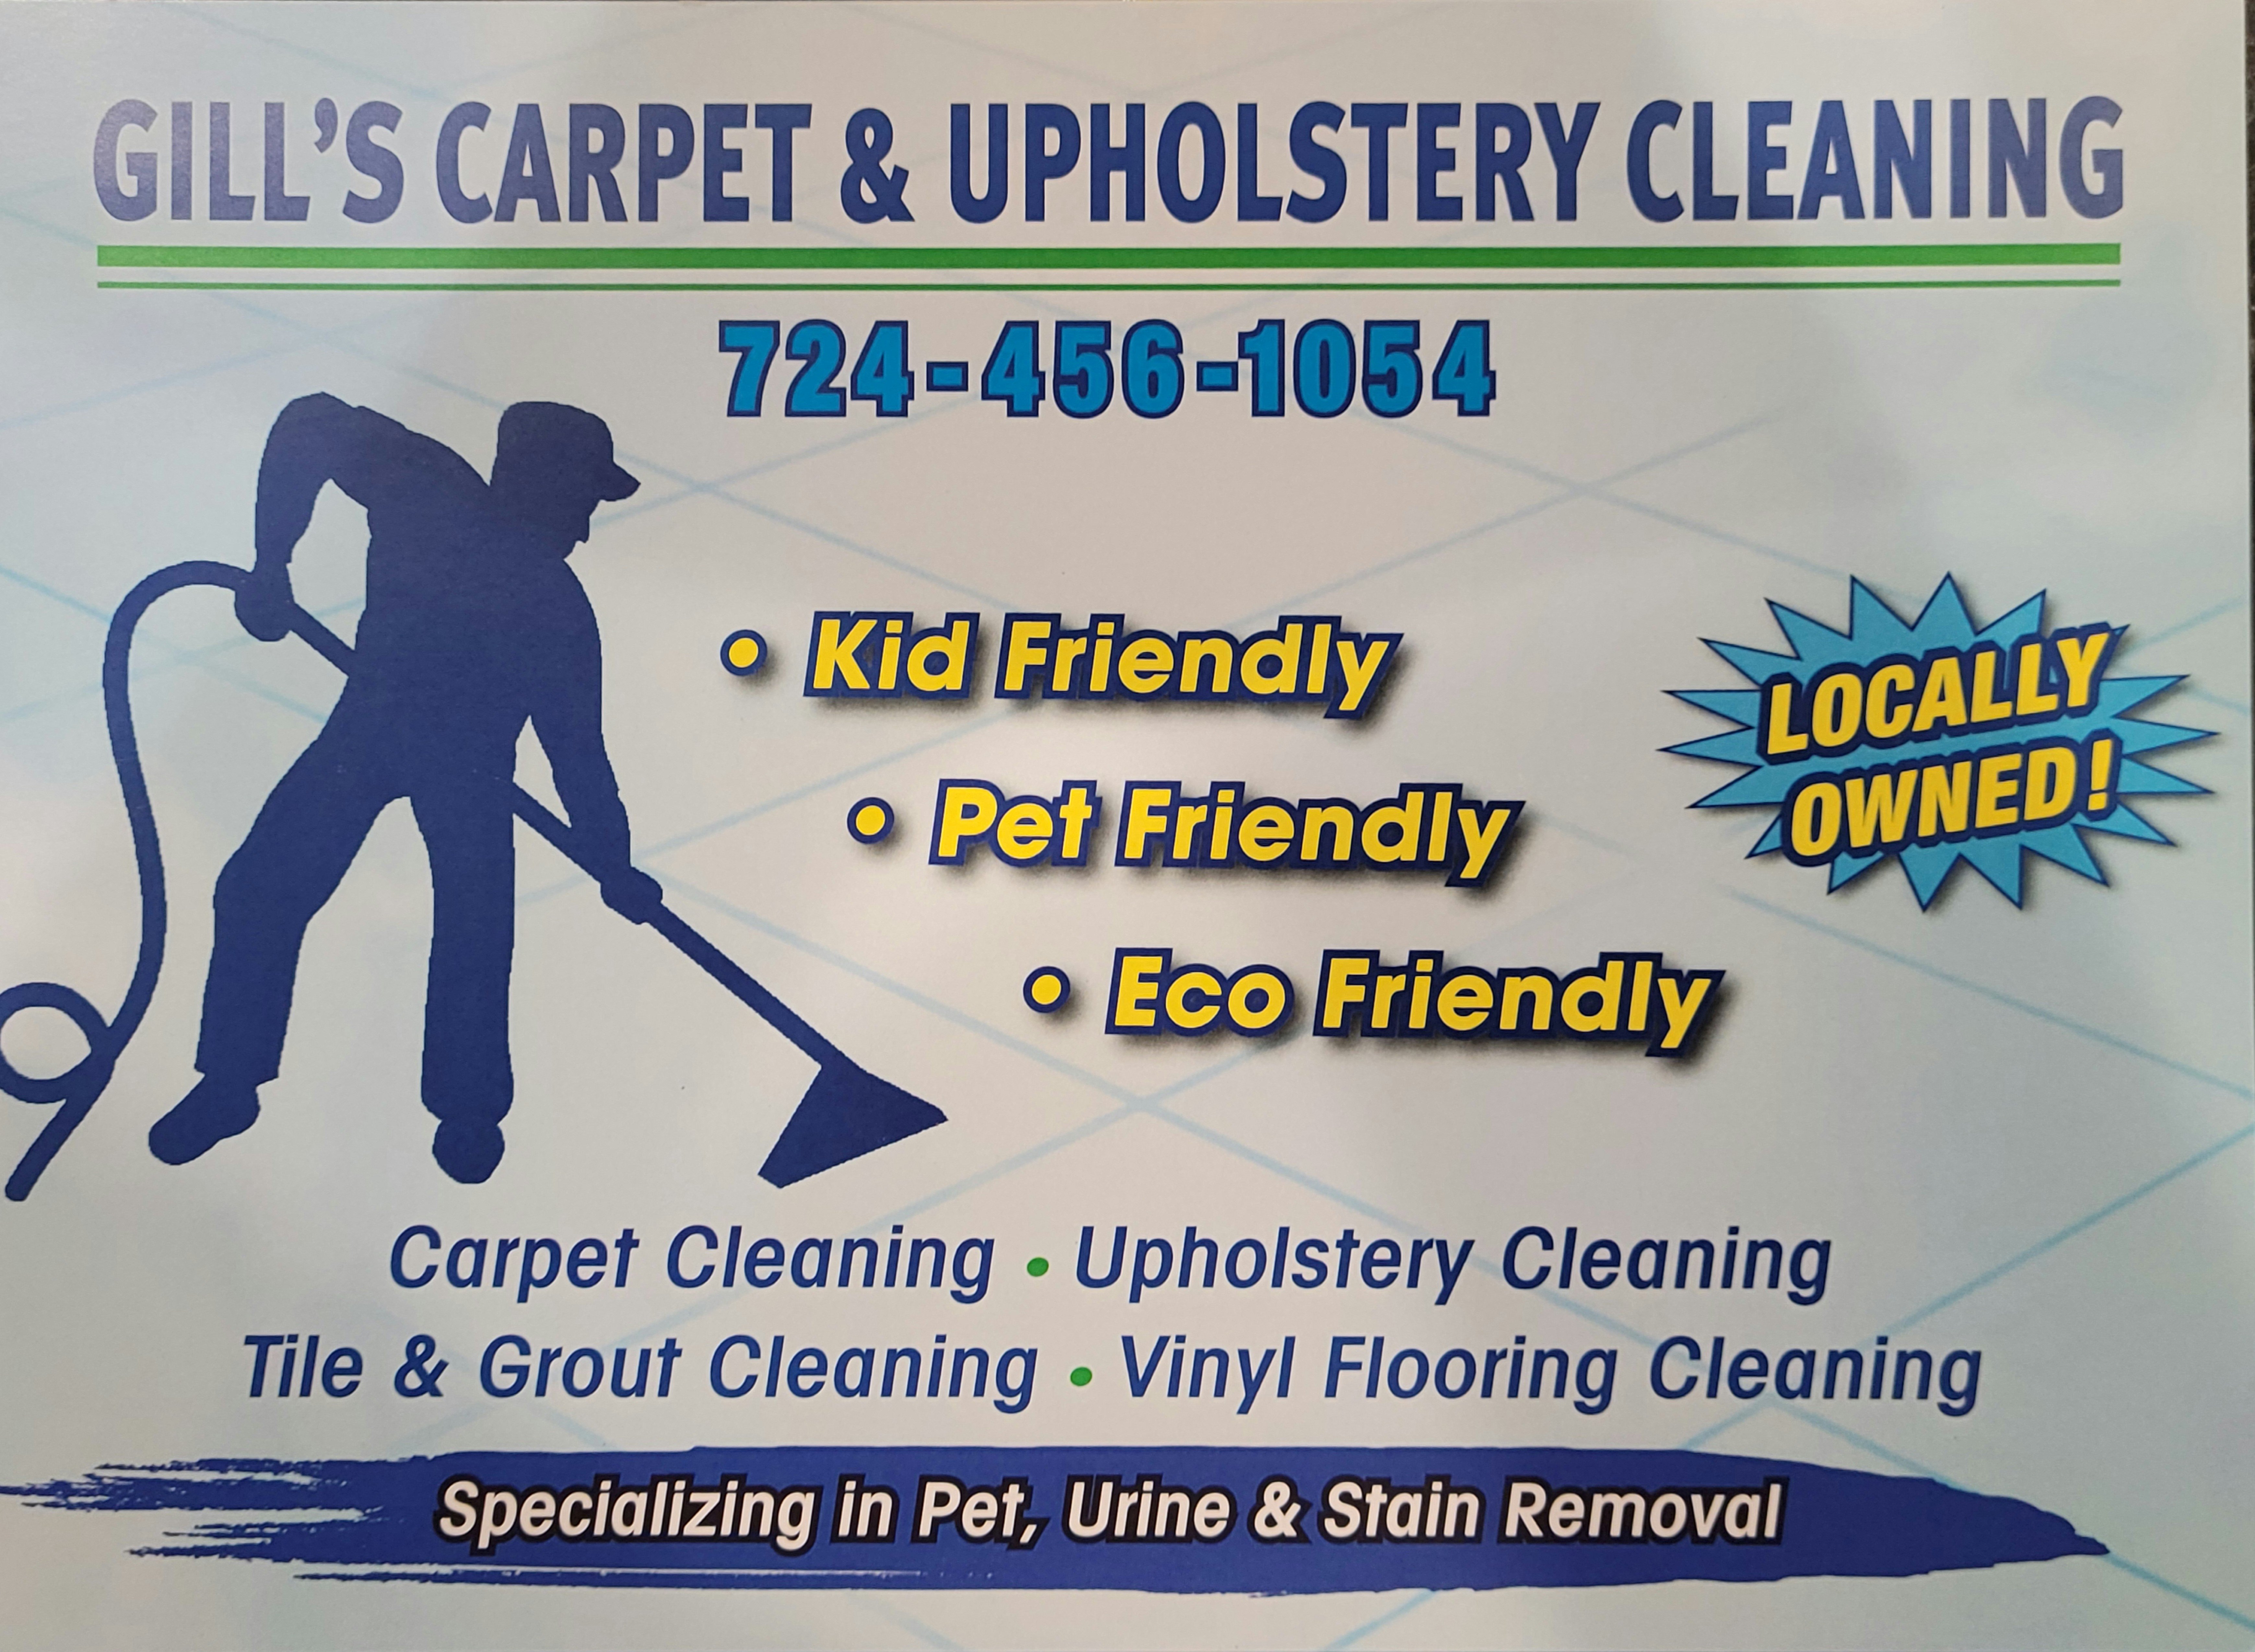 Gill's Carpet and Upholstery Cleaning, LLC Logo